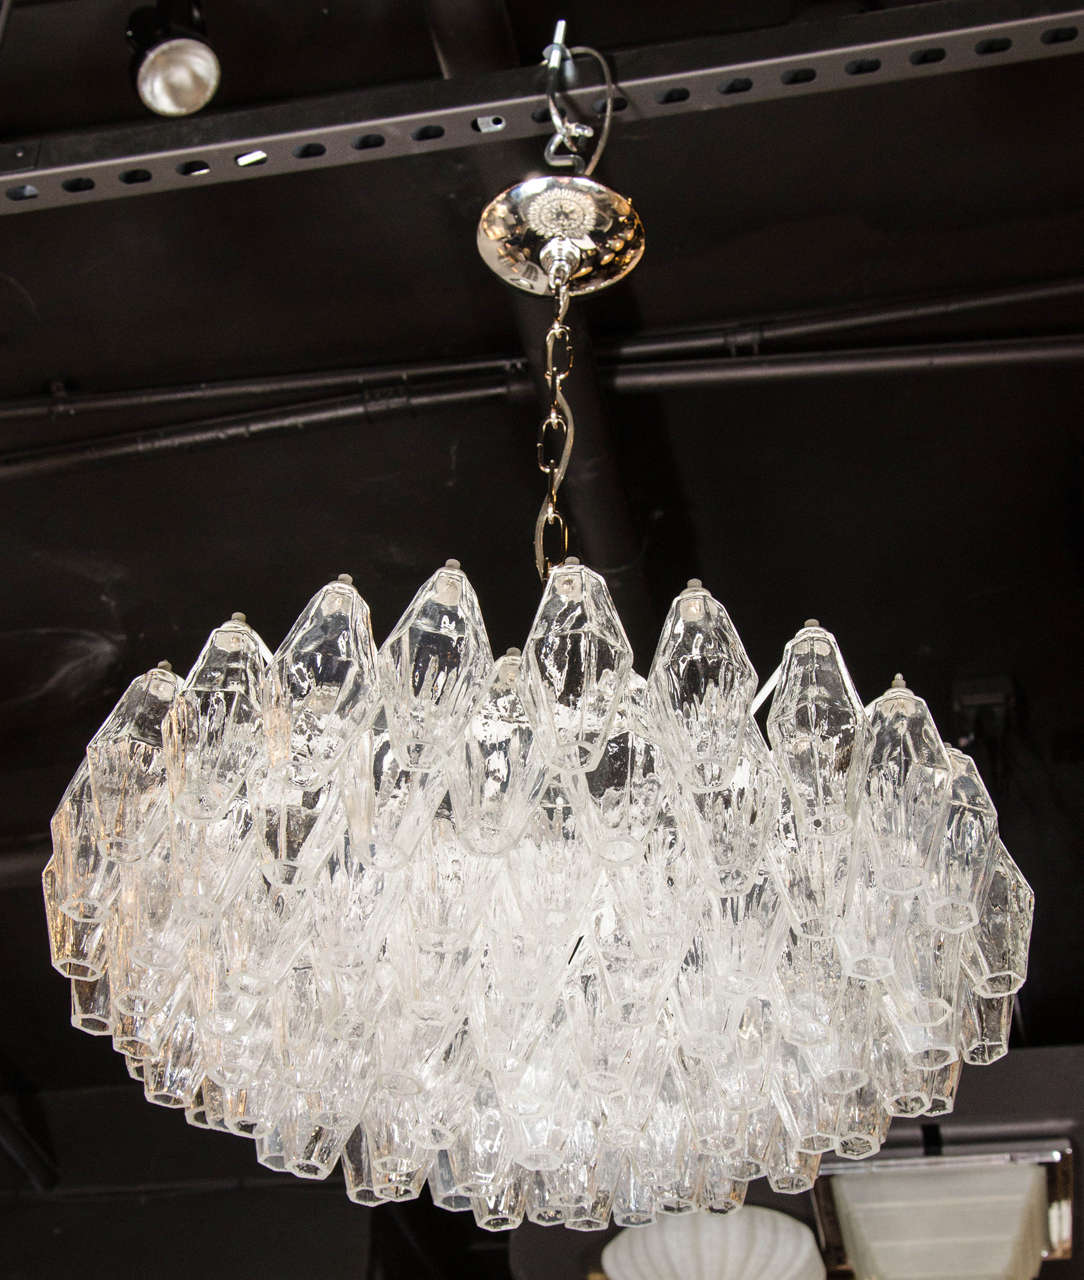 This luminous modernist glass chandelier features numerous handblown Murano translucent glass polyhedral shades. Each glass polyhedral shade is individually hung from its frame by hand. The frame features the subtle upward graduation from its center